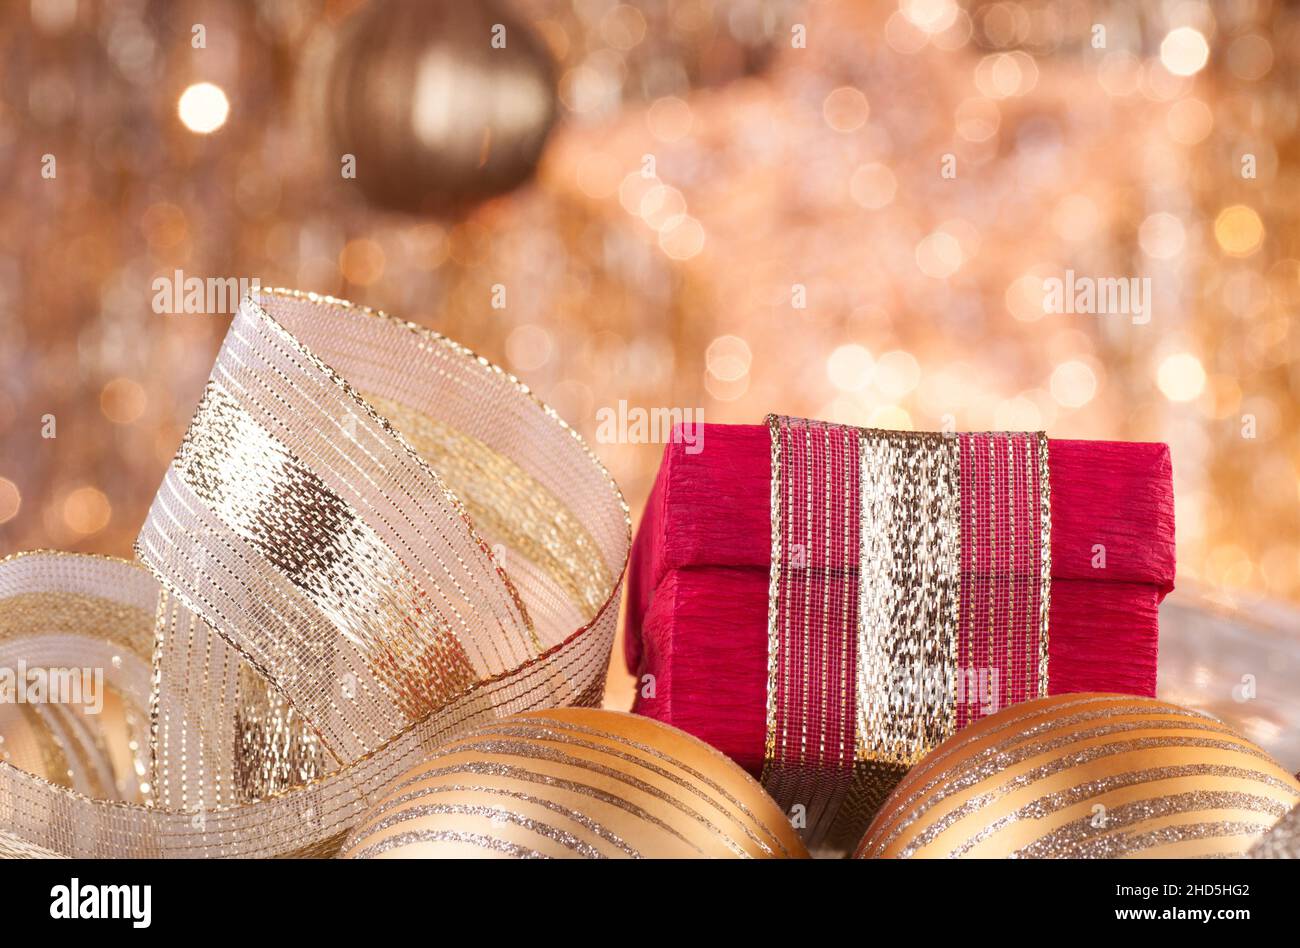 gold christmas baubles and red box on background of defocused golden lights. Stock Photo